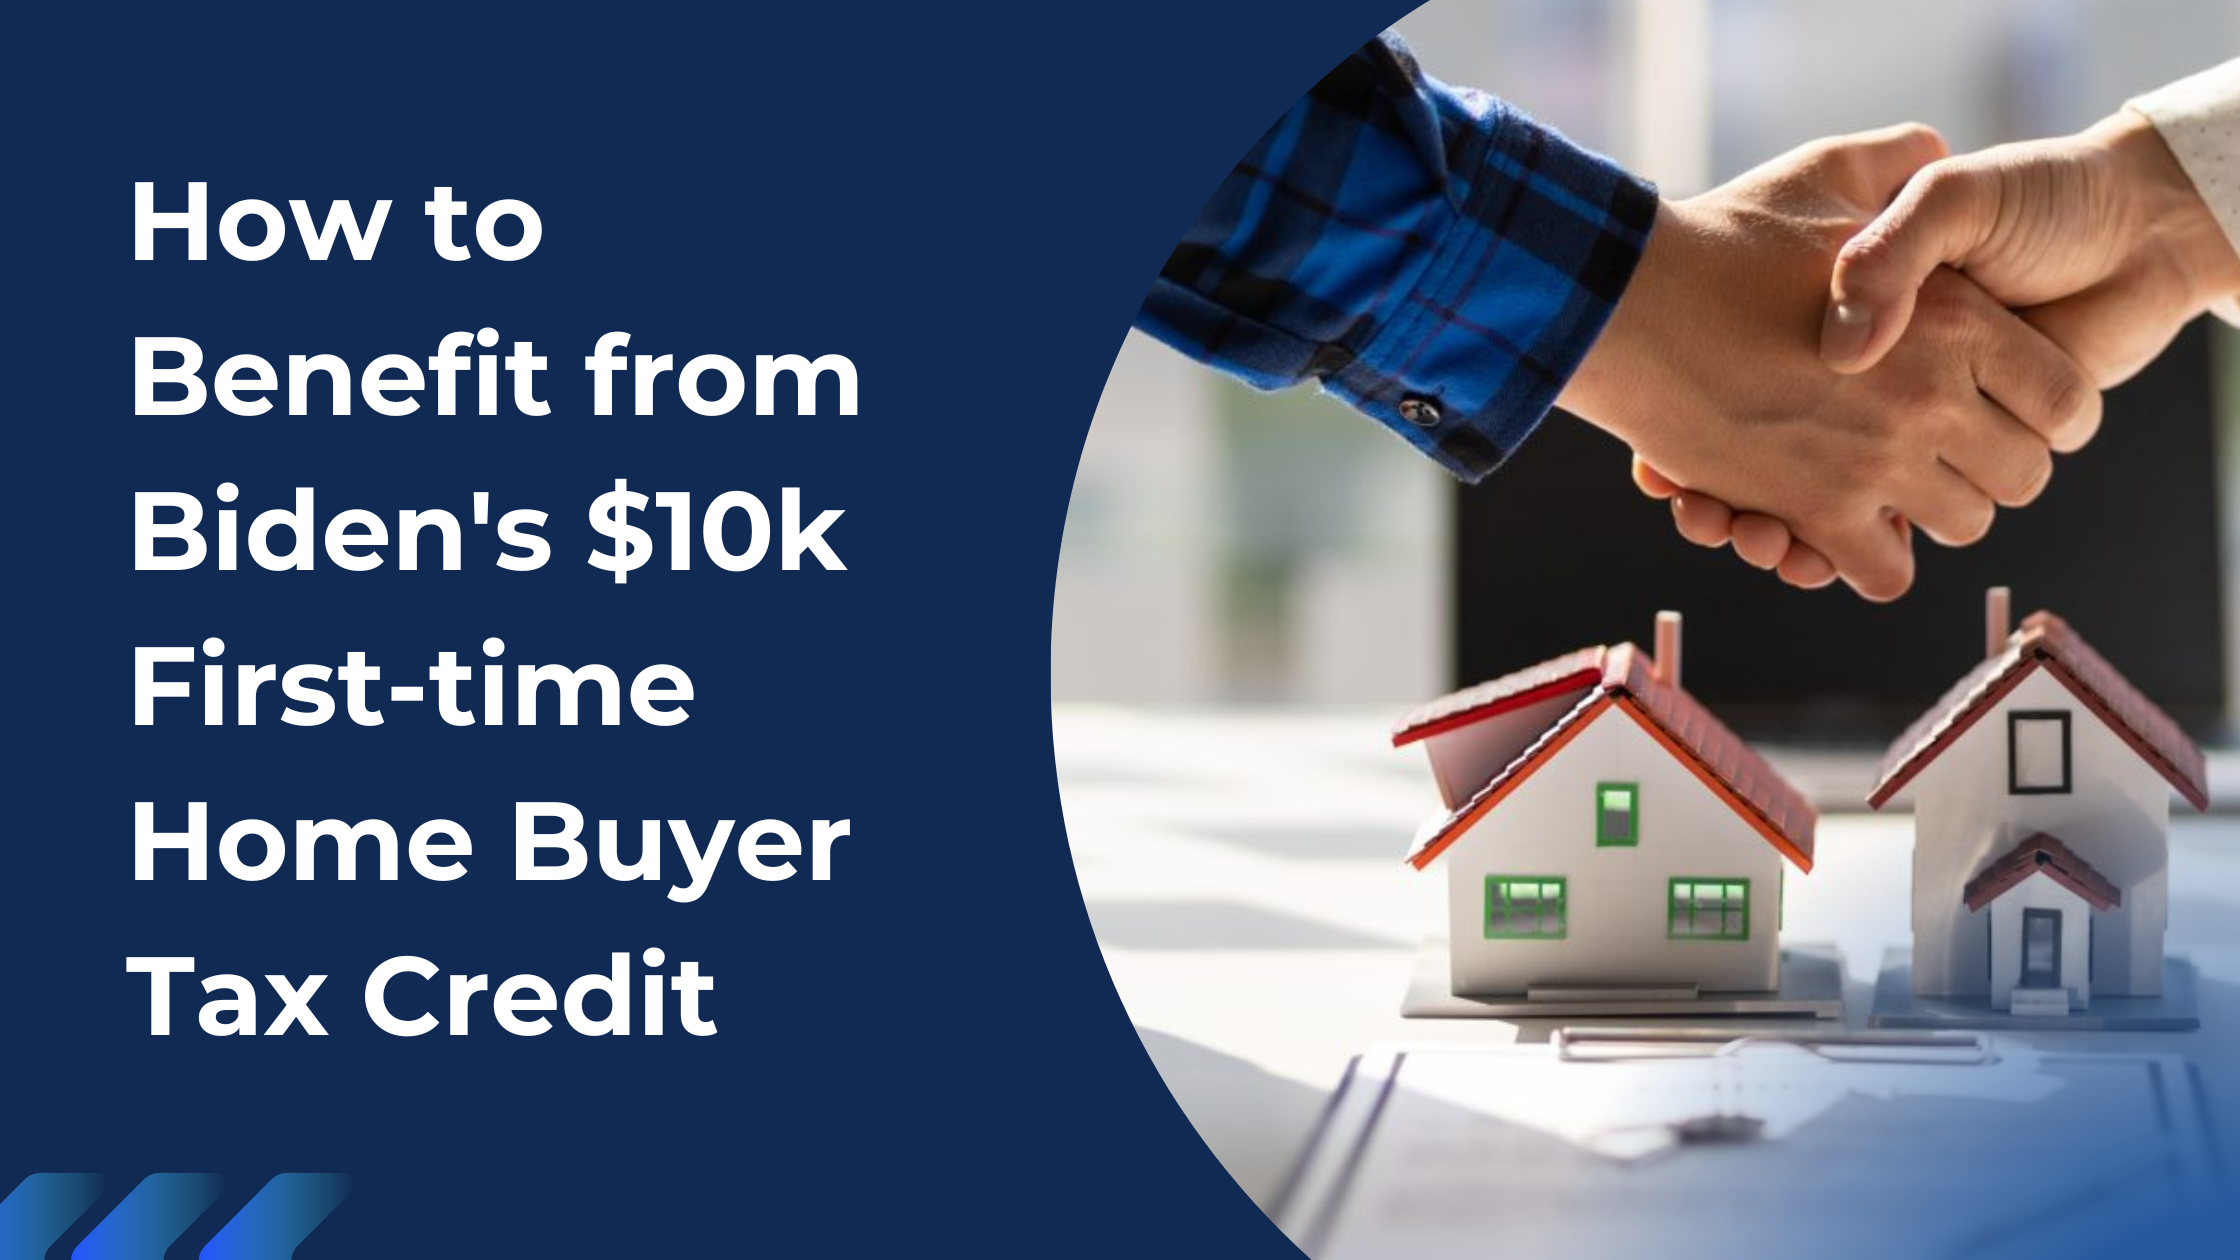 How to Benefit from Biden's $10k First-time Home Buyer Tax Credit